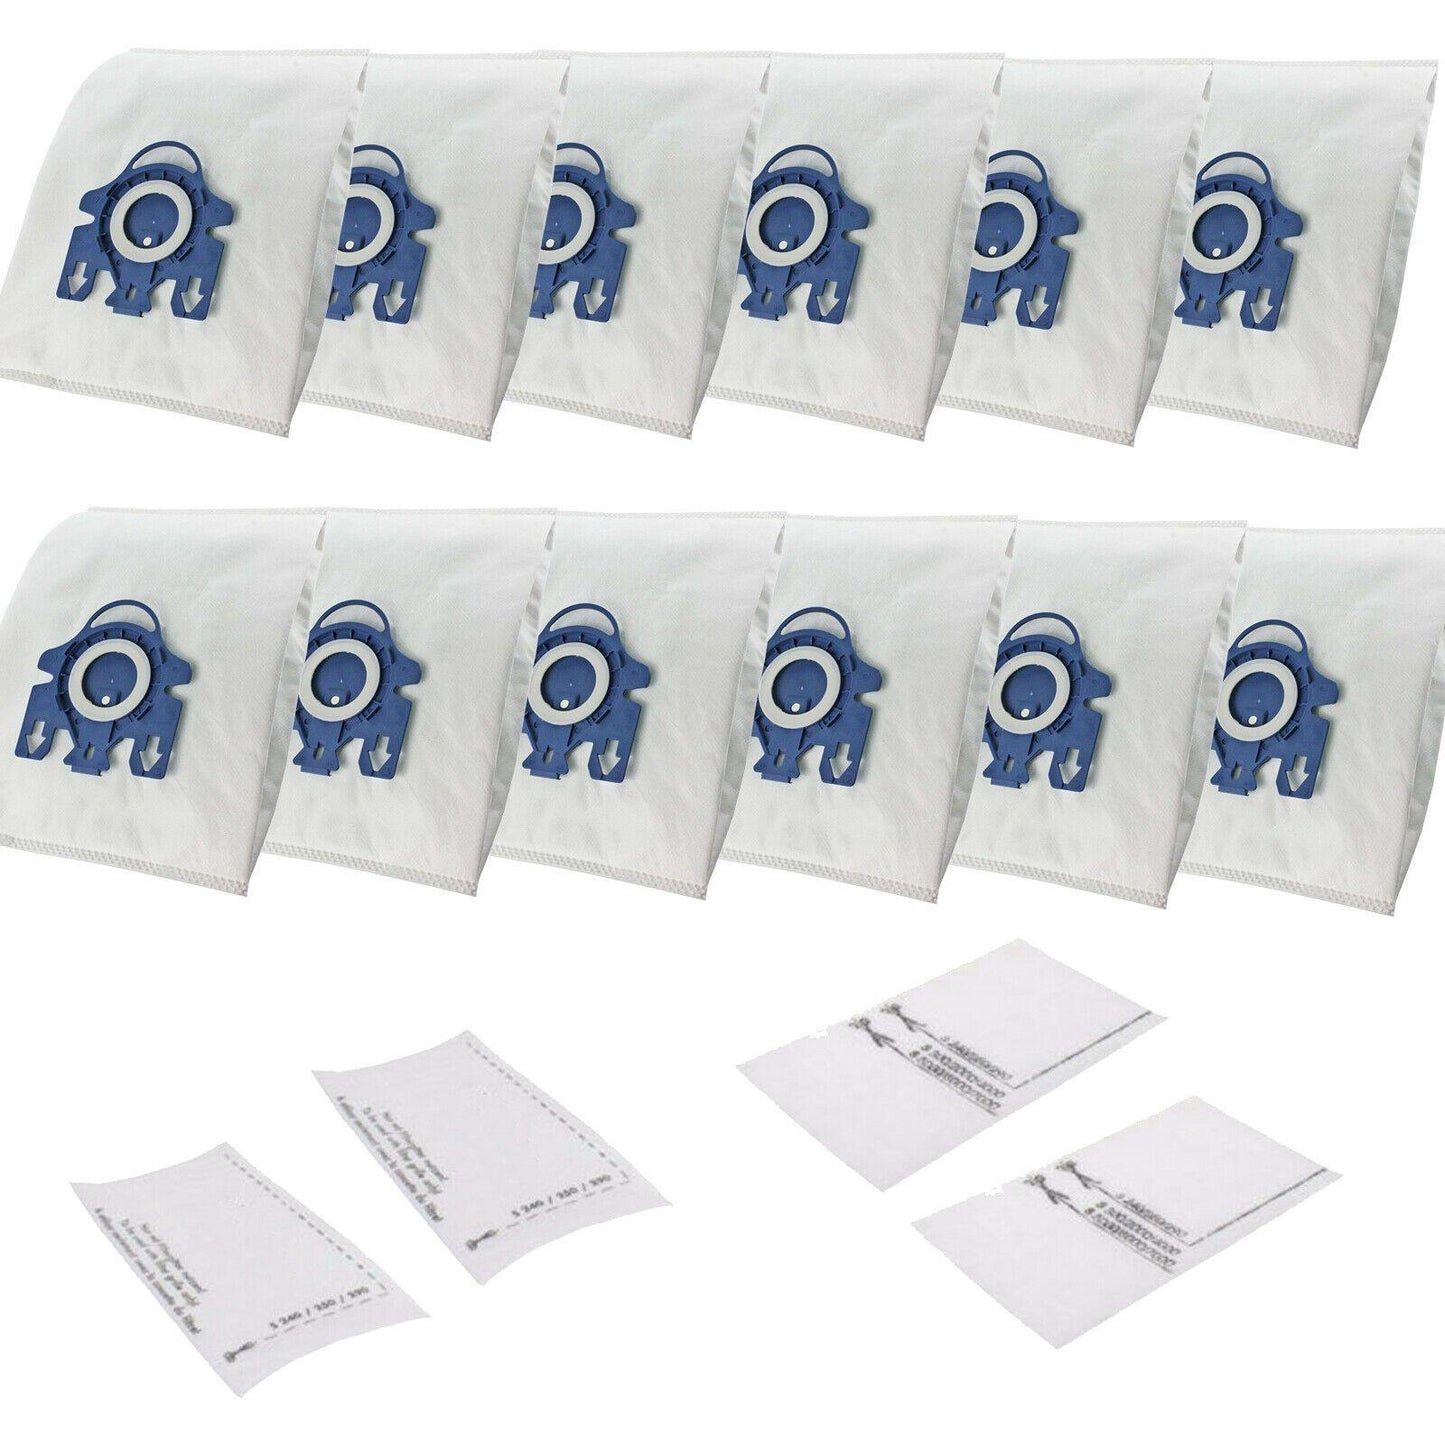 12 Bags + 8 Filters For Miele GN Vacuum Cleaner Hyclean 3D Type Cat n dog Blue Sparesbarn